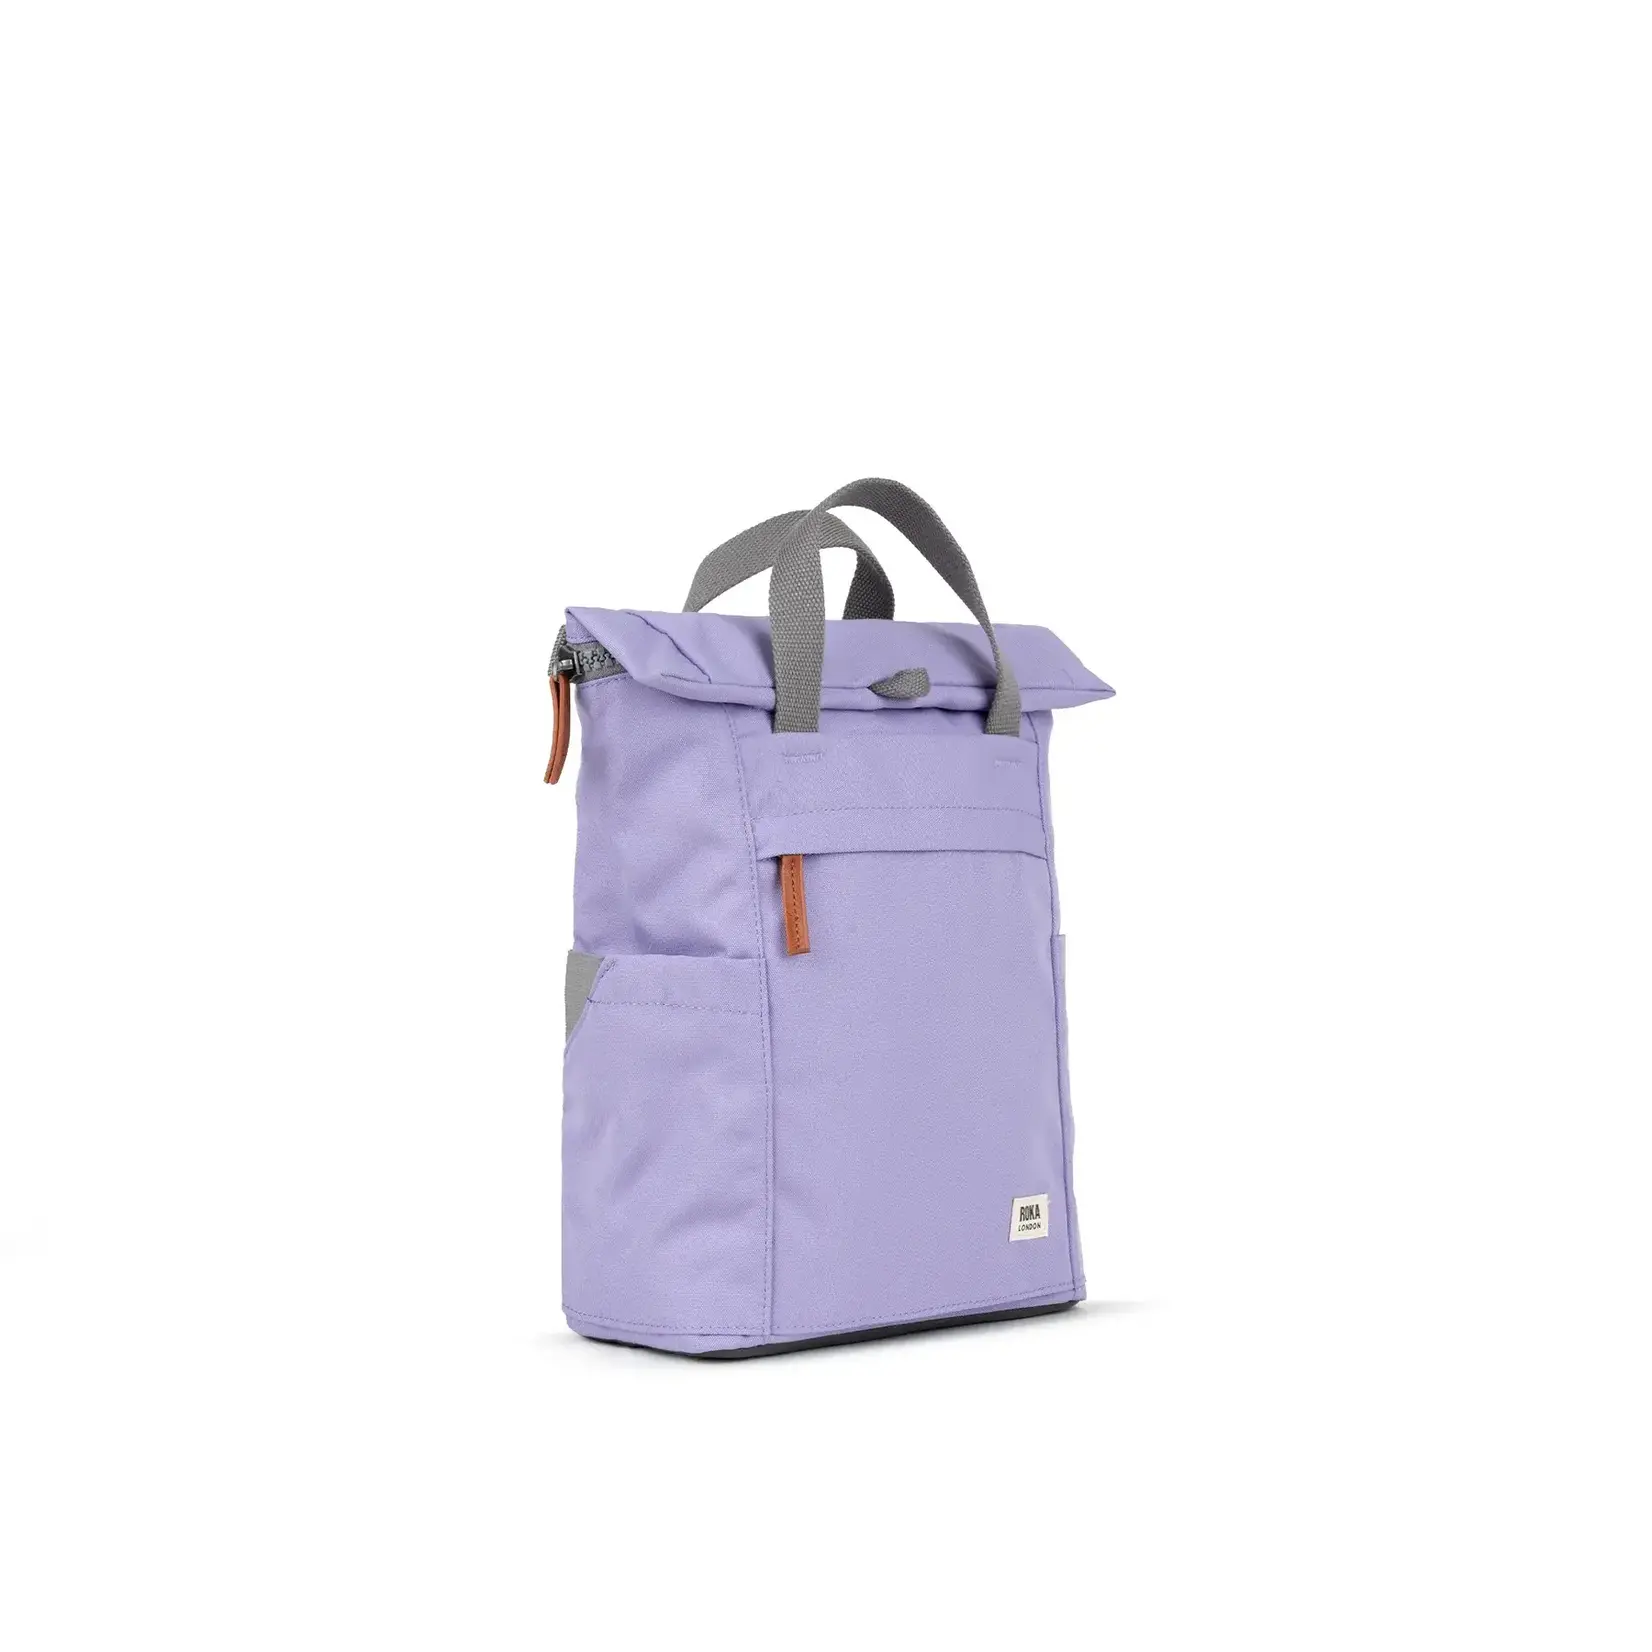 ROKA London Finchley A Lavender Recycled Canvas12-15 recycled bottles Small